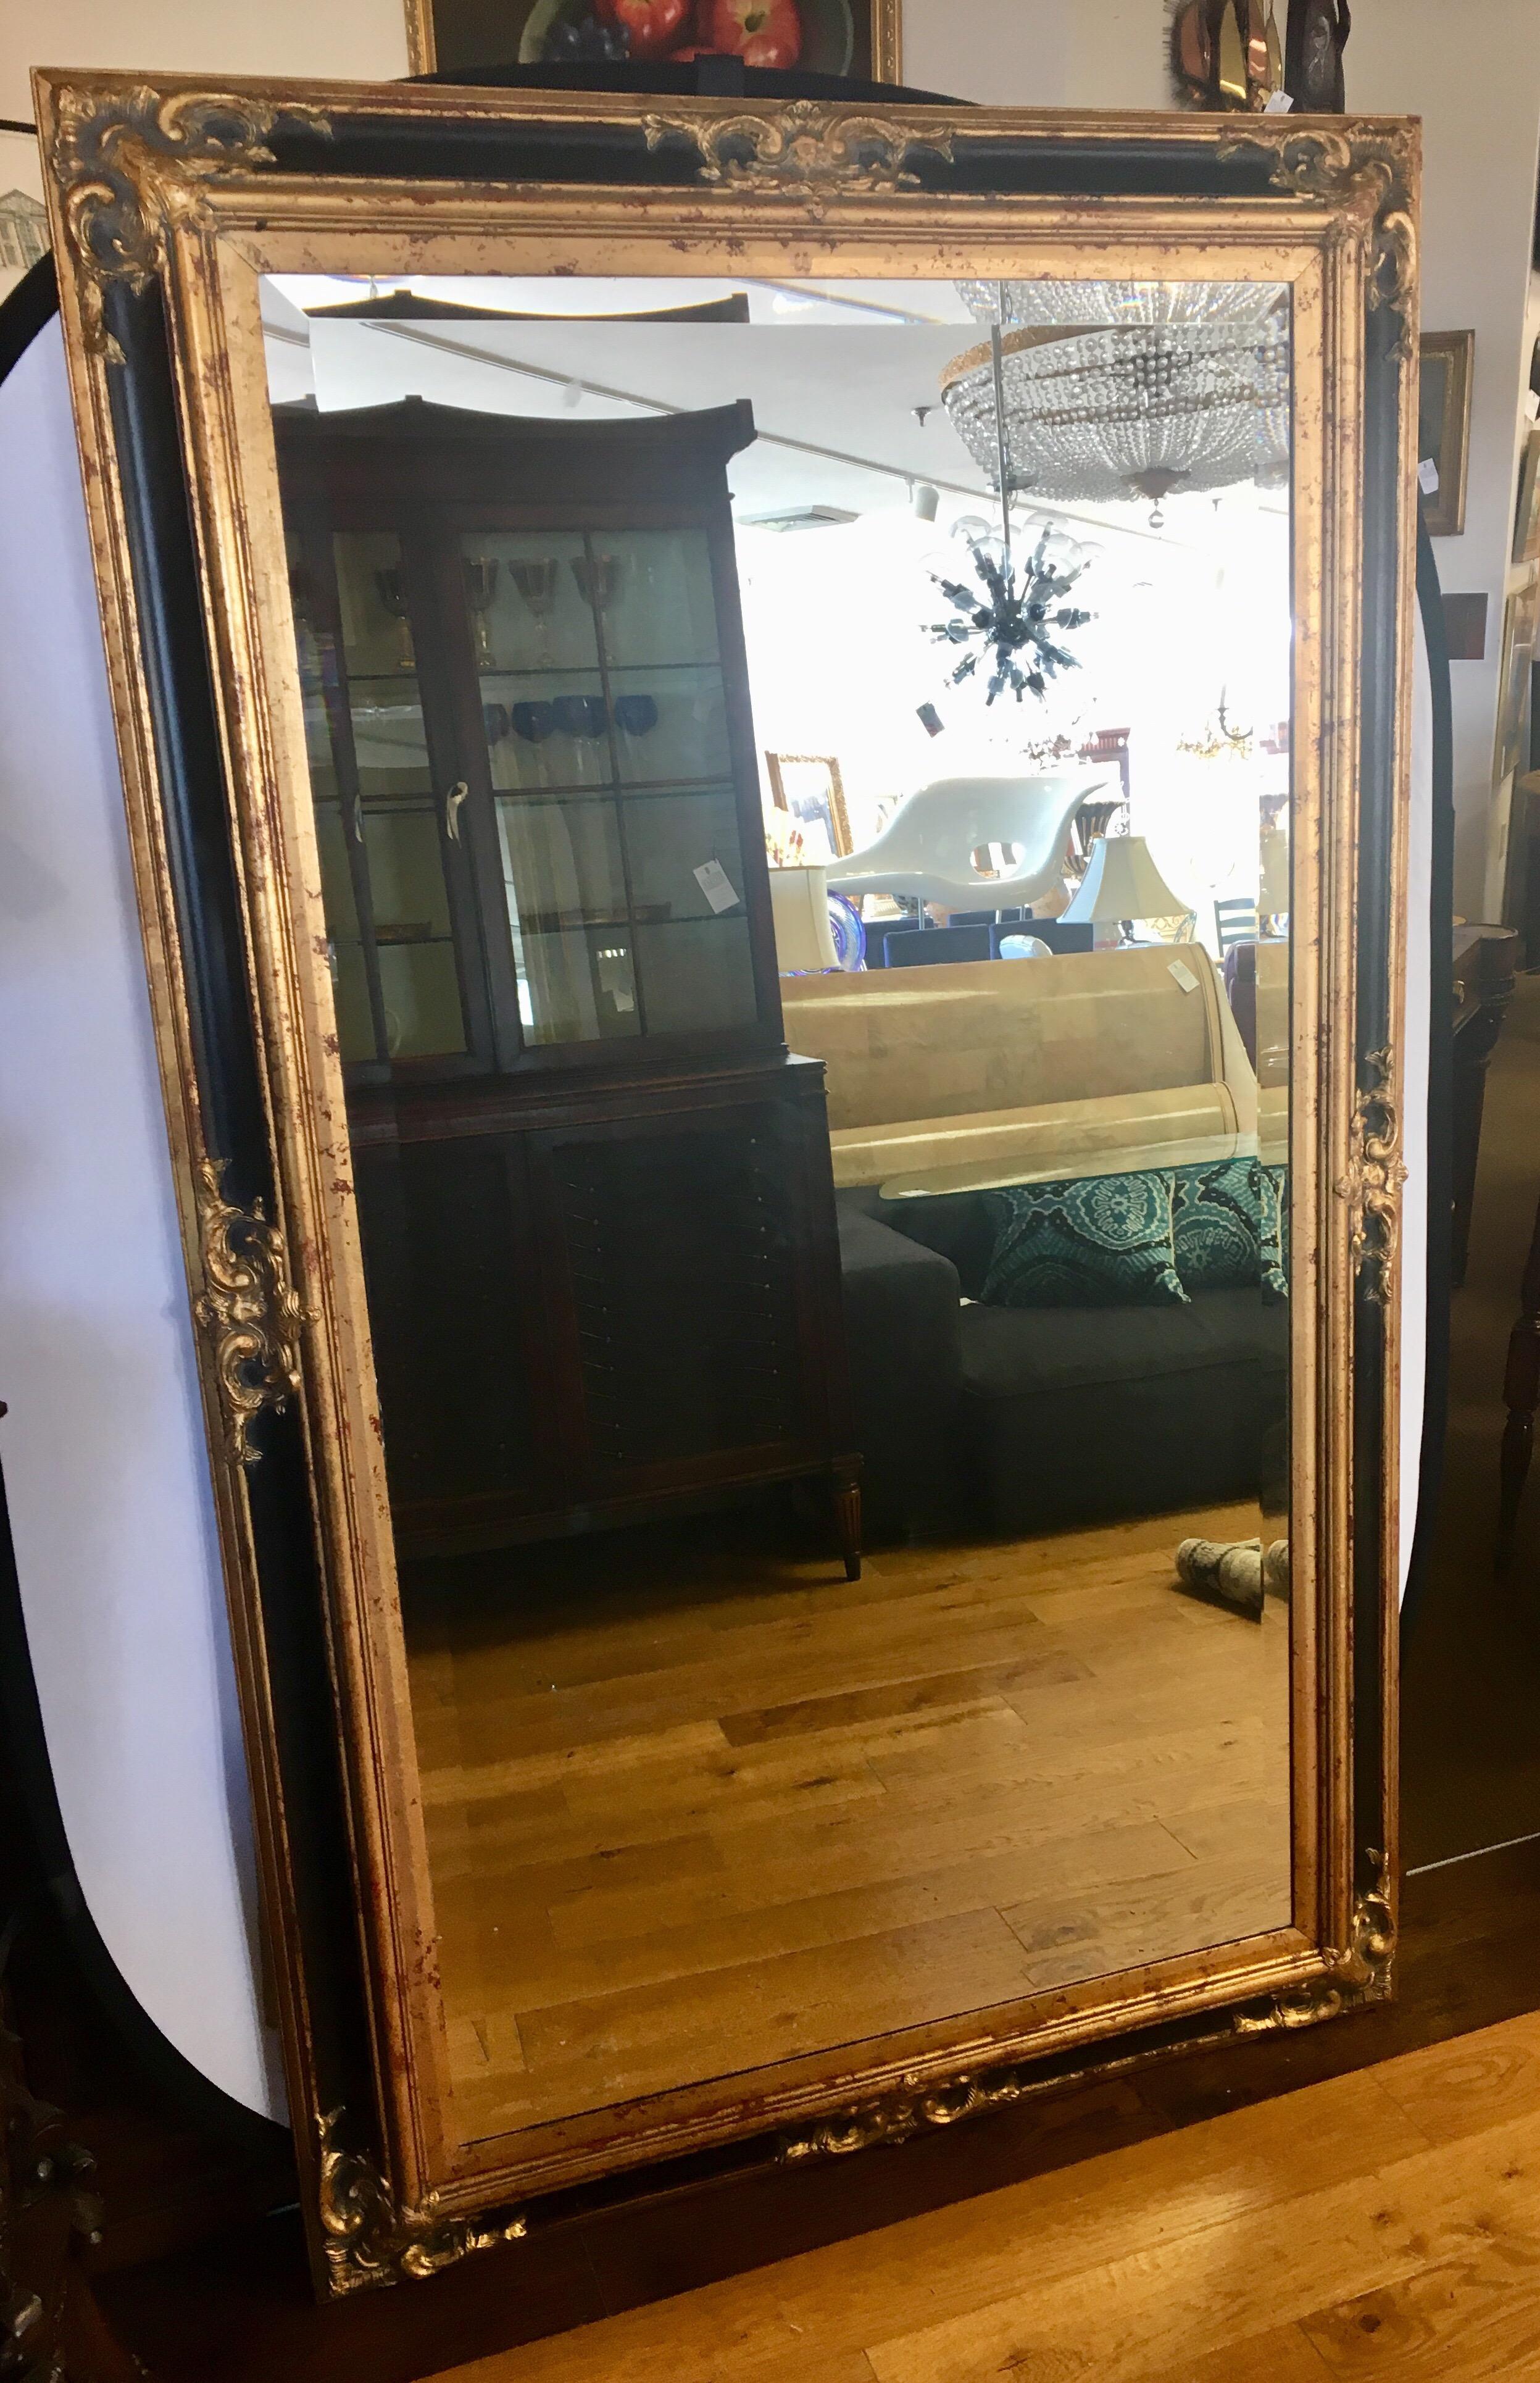 Stunning neoclassical composite full length floor mirror, beveled with black and gold composite border.
Ready to hang horizontally also. The color scheme and detail are extremely elegant and would highlight
many types of decor.